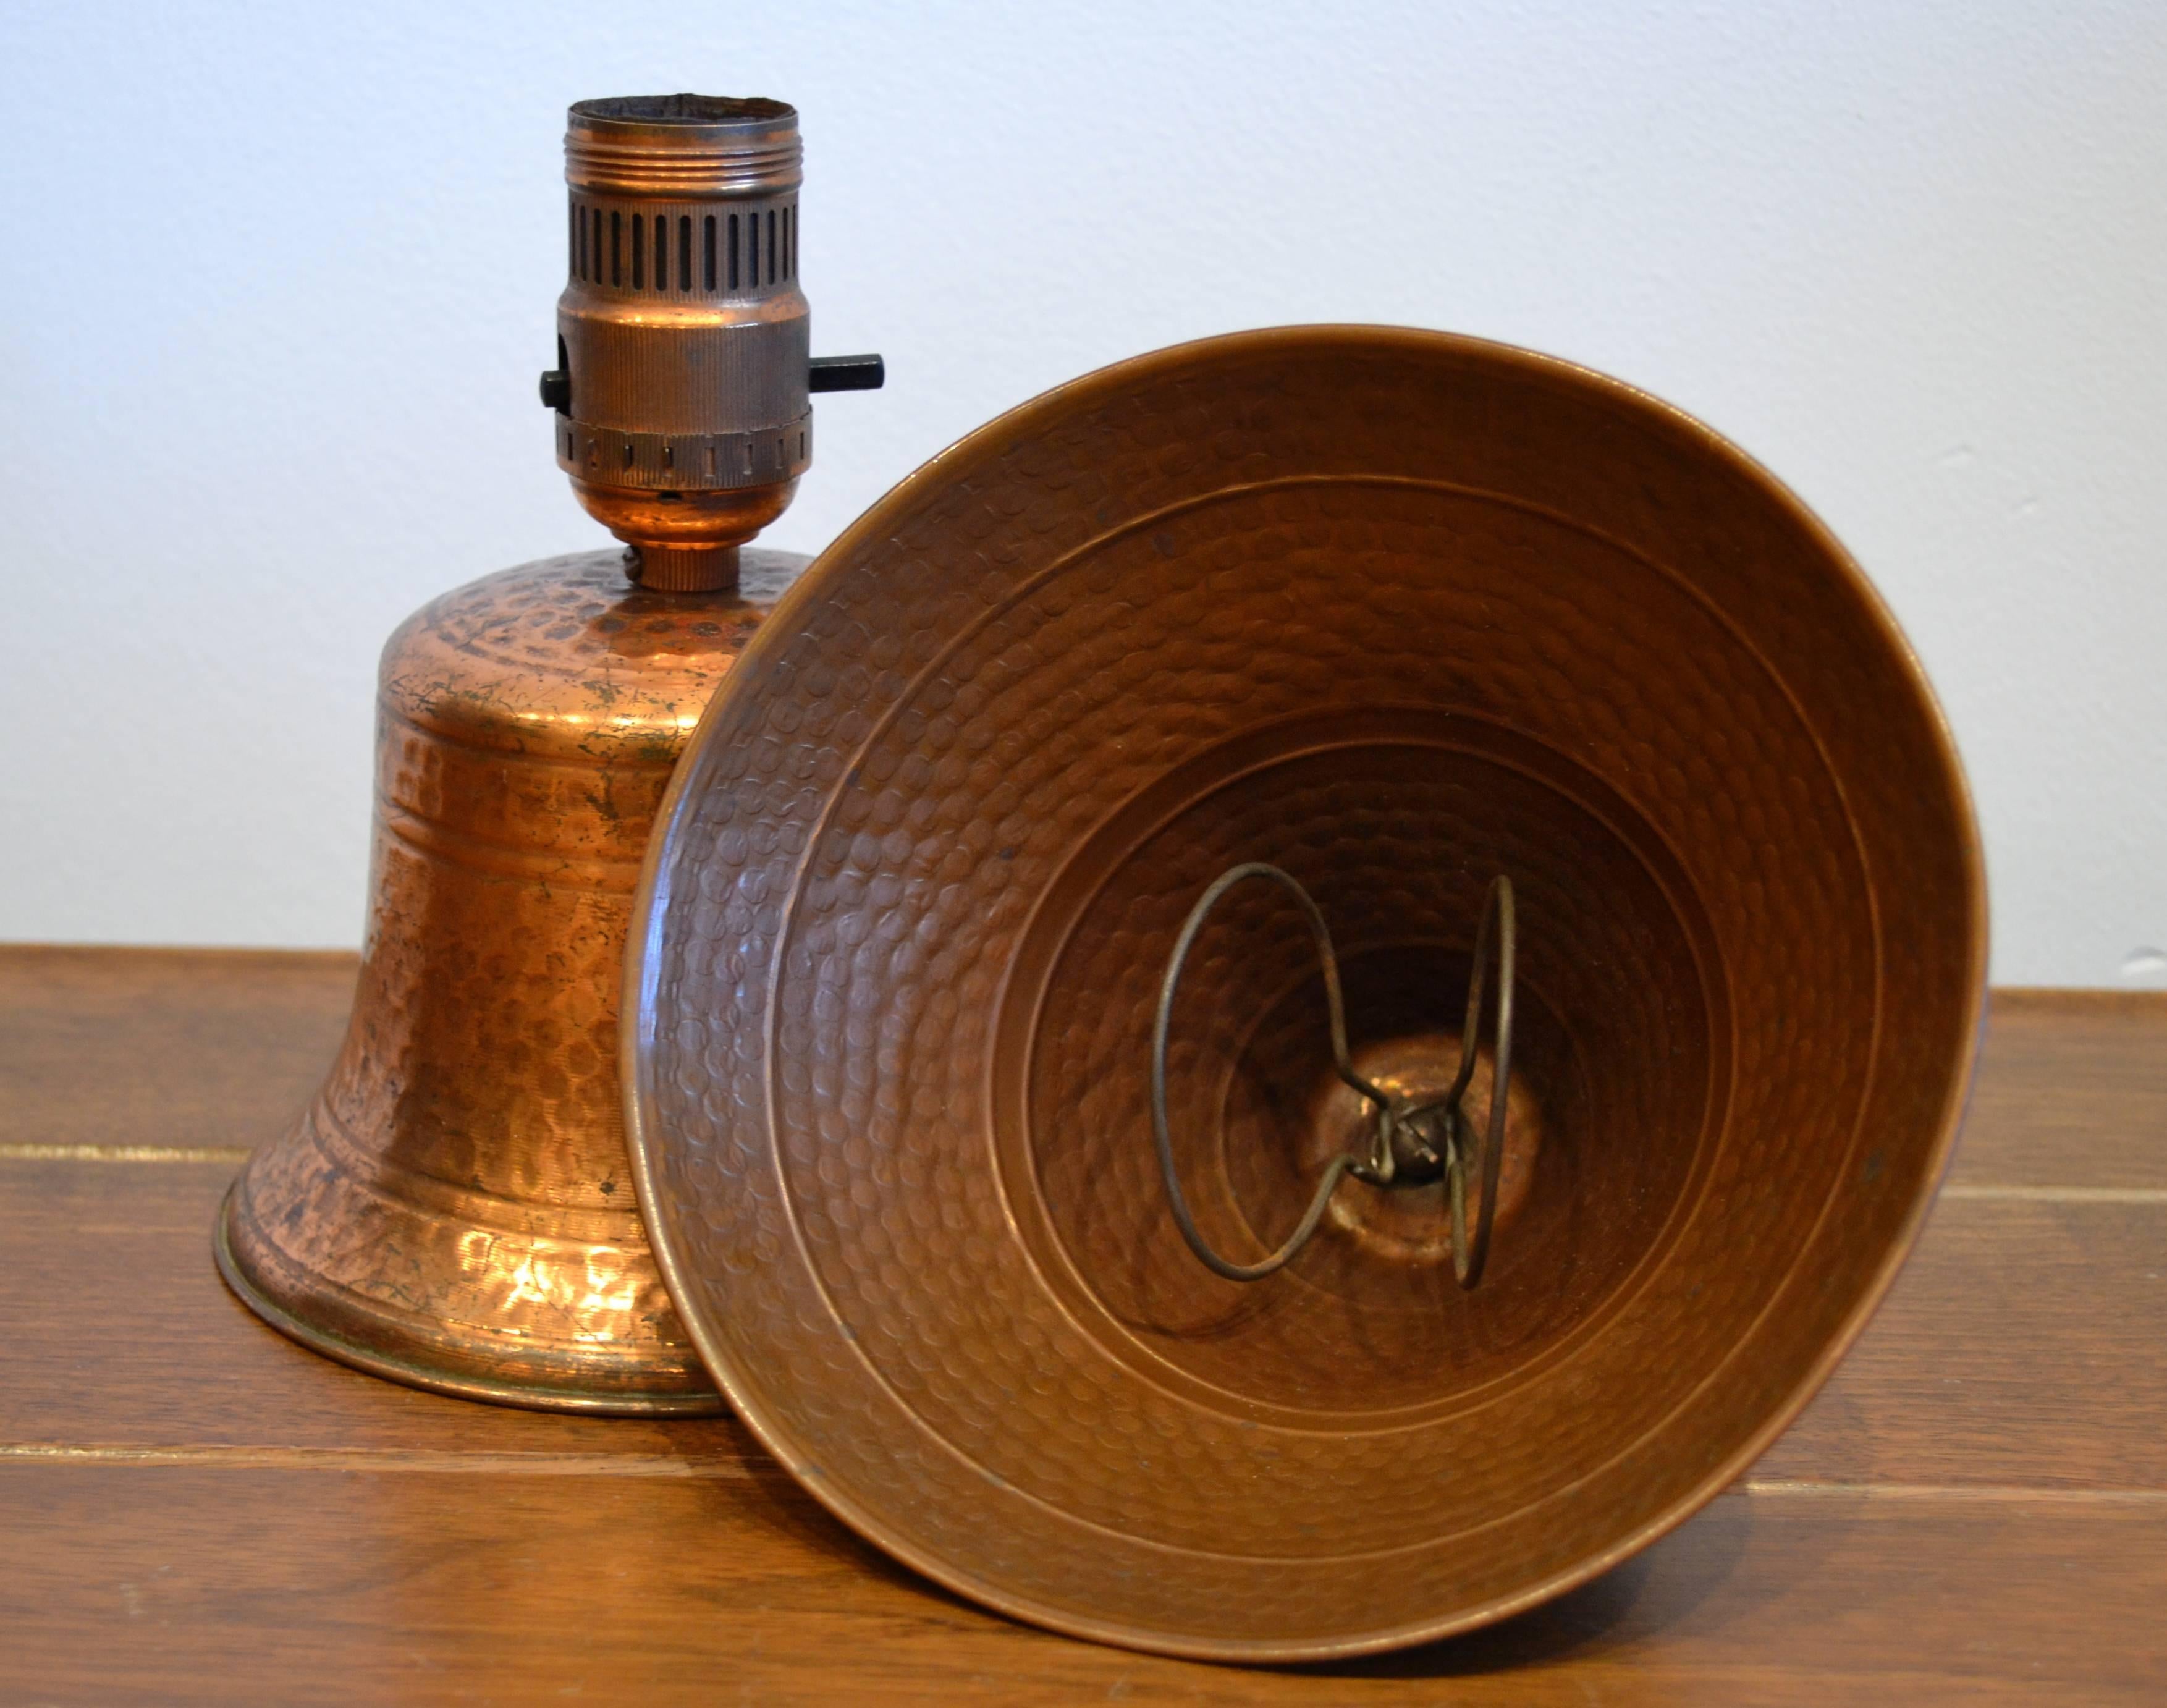 hammered copper lamp